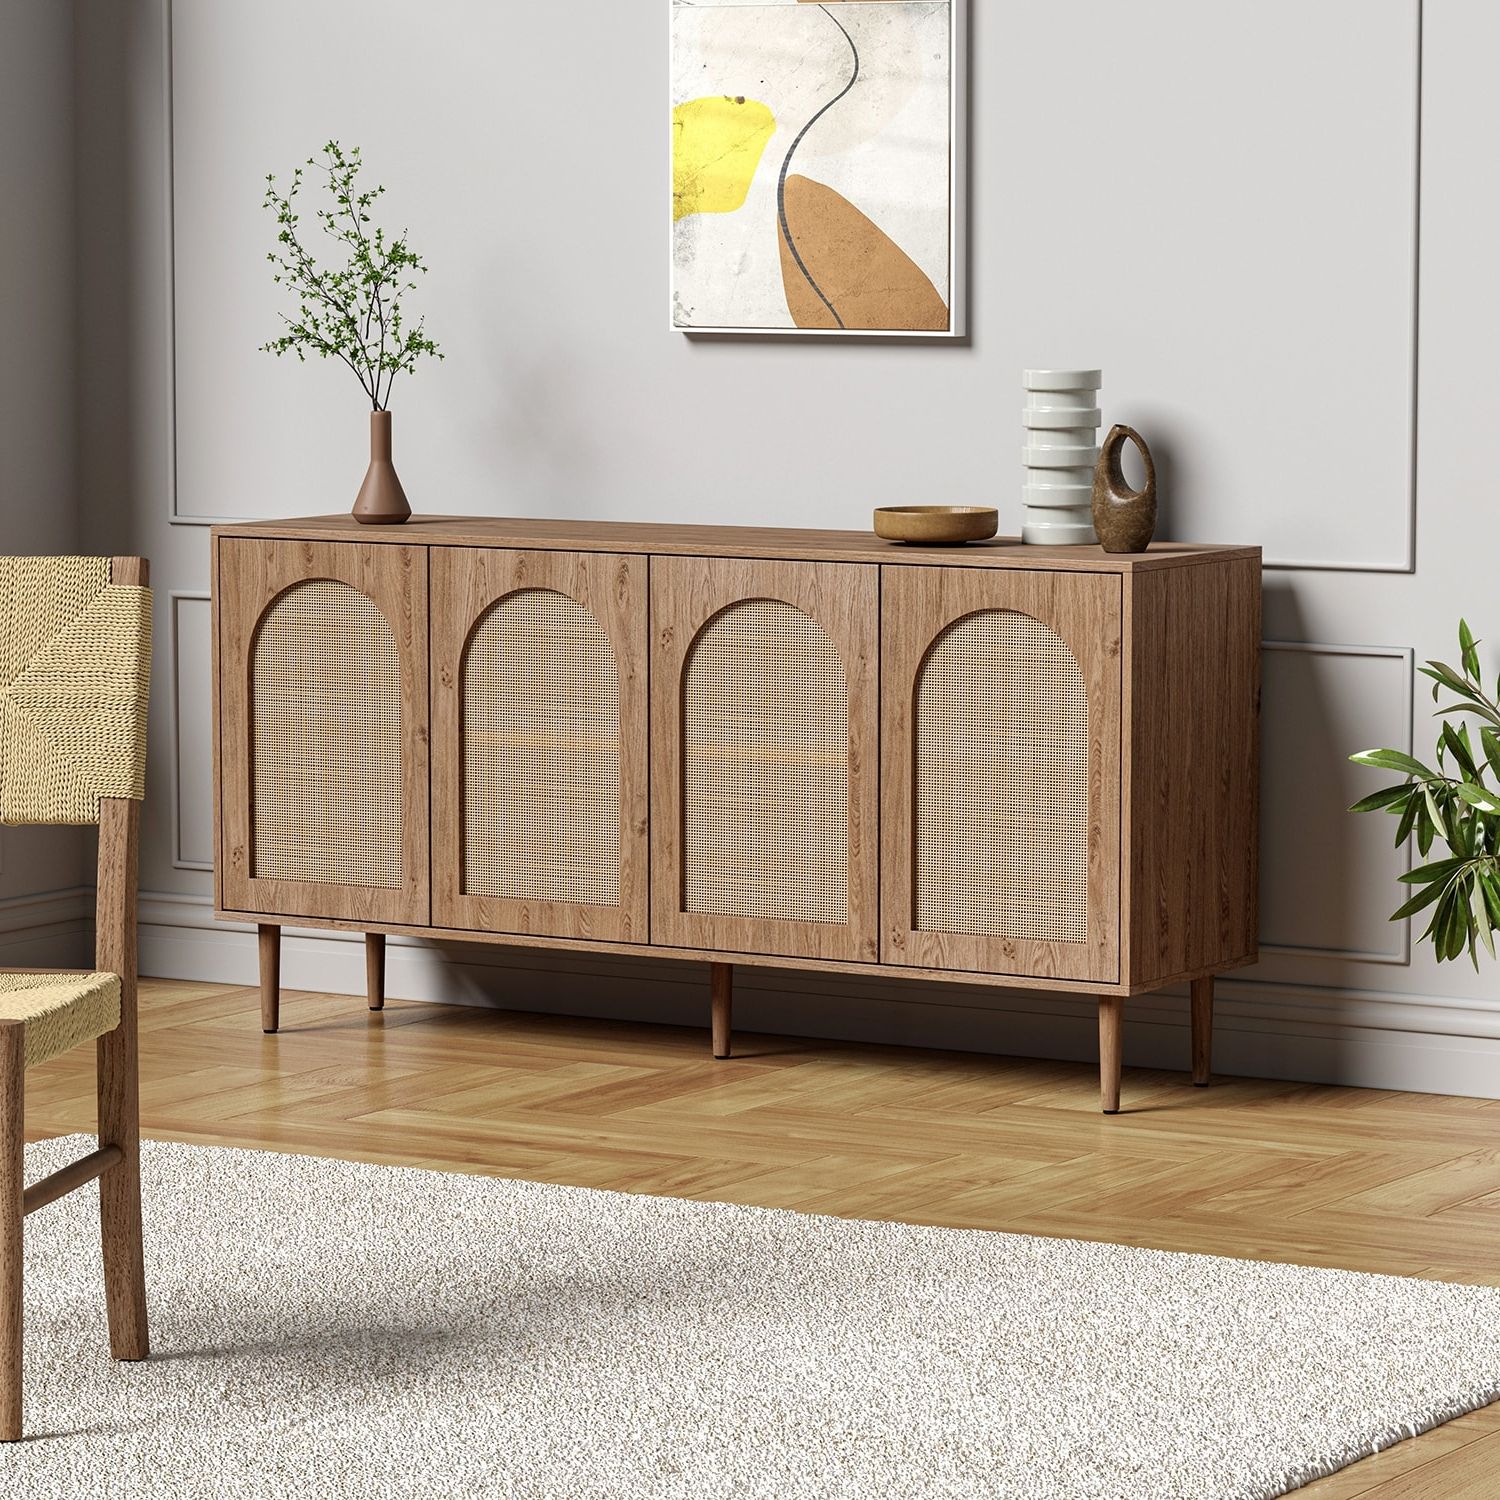 Uirico Multifunctional Buffet Sideboard Cabinet With Rattan Design Hulala Home – On Sale – Bed Bath & Beyond – 37218719 Pertaining To 2019 Assembled Rattan Buffet Sideboards (View 12 of 15)